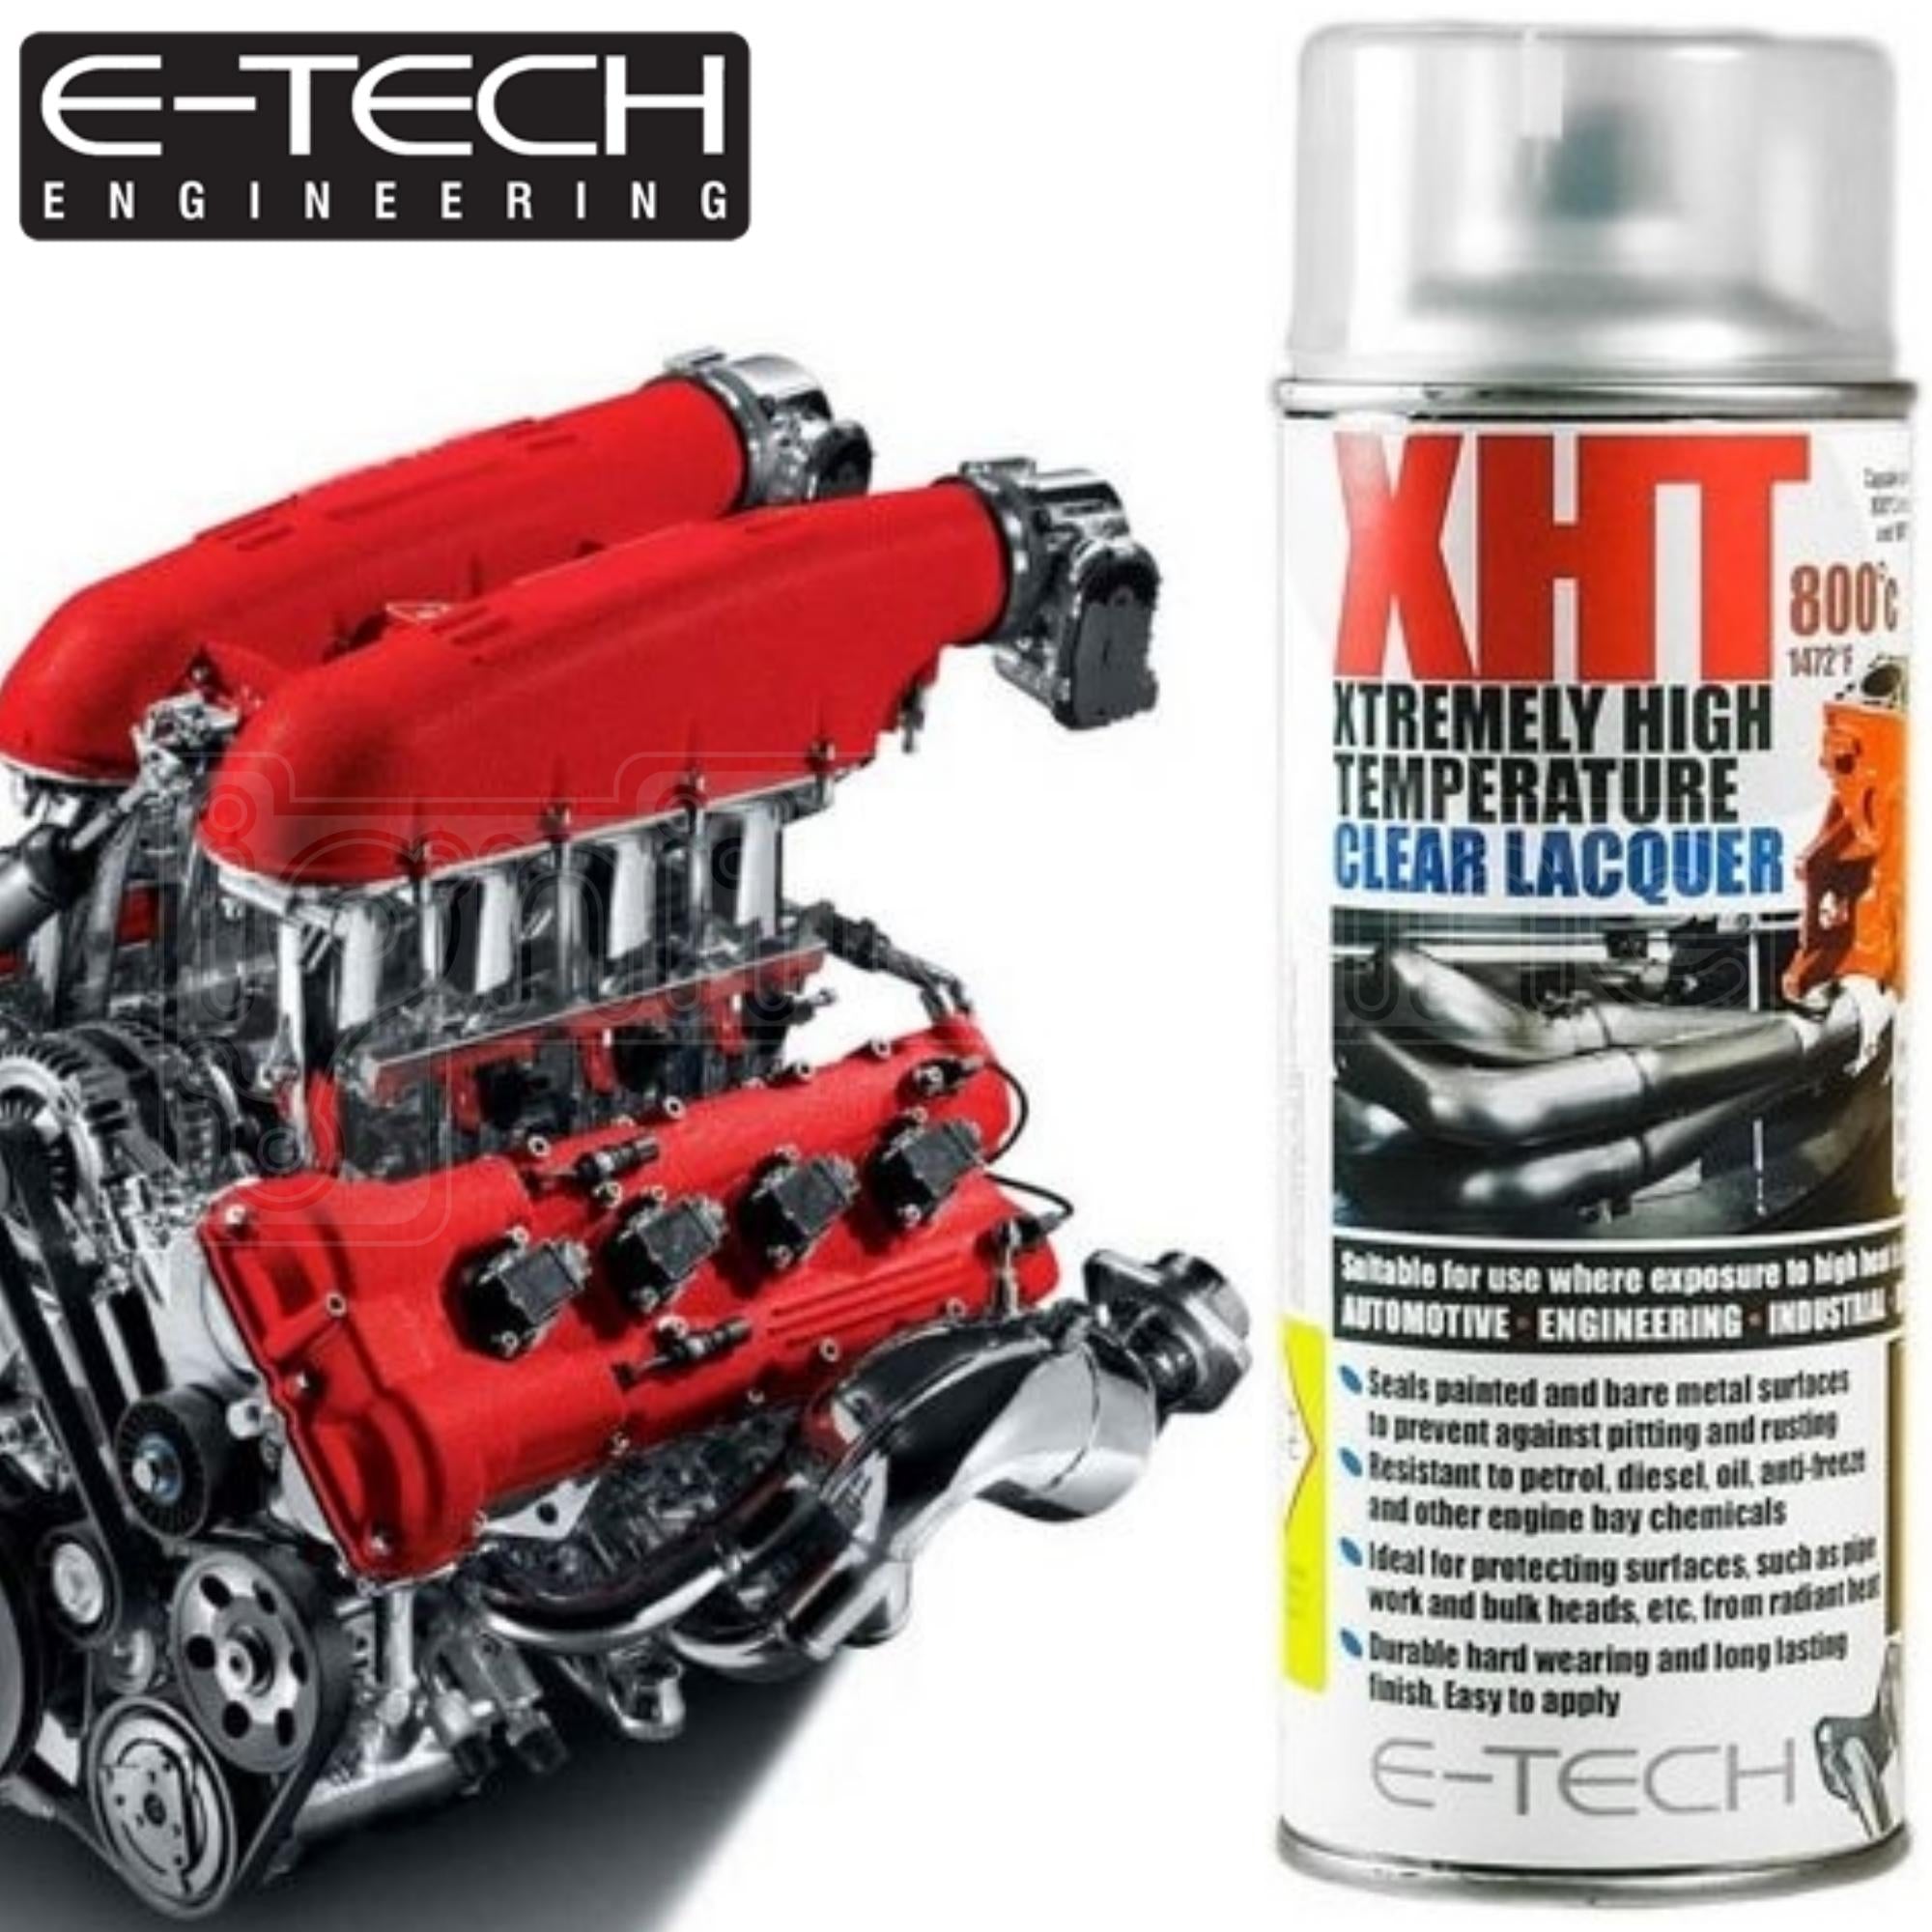 E-TECH XHT Xtremely High Temperature CLEAR Lacquer